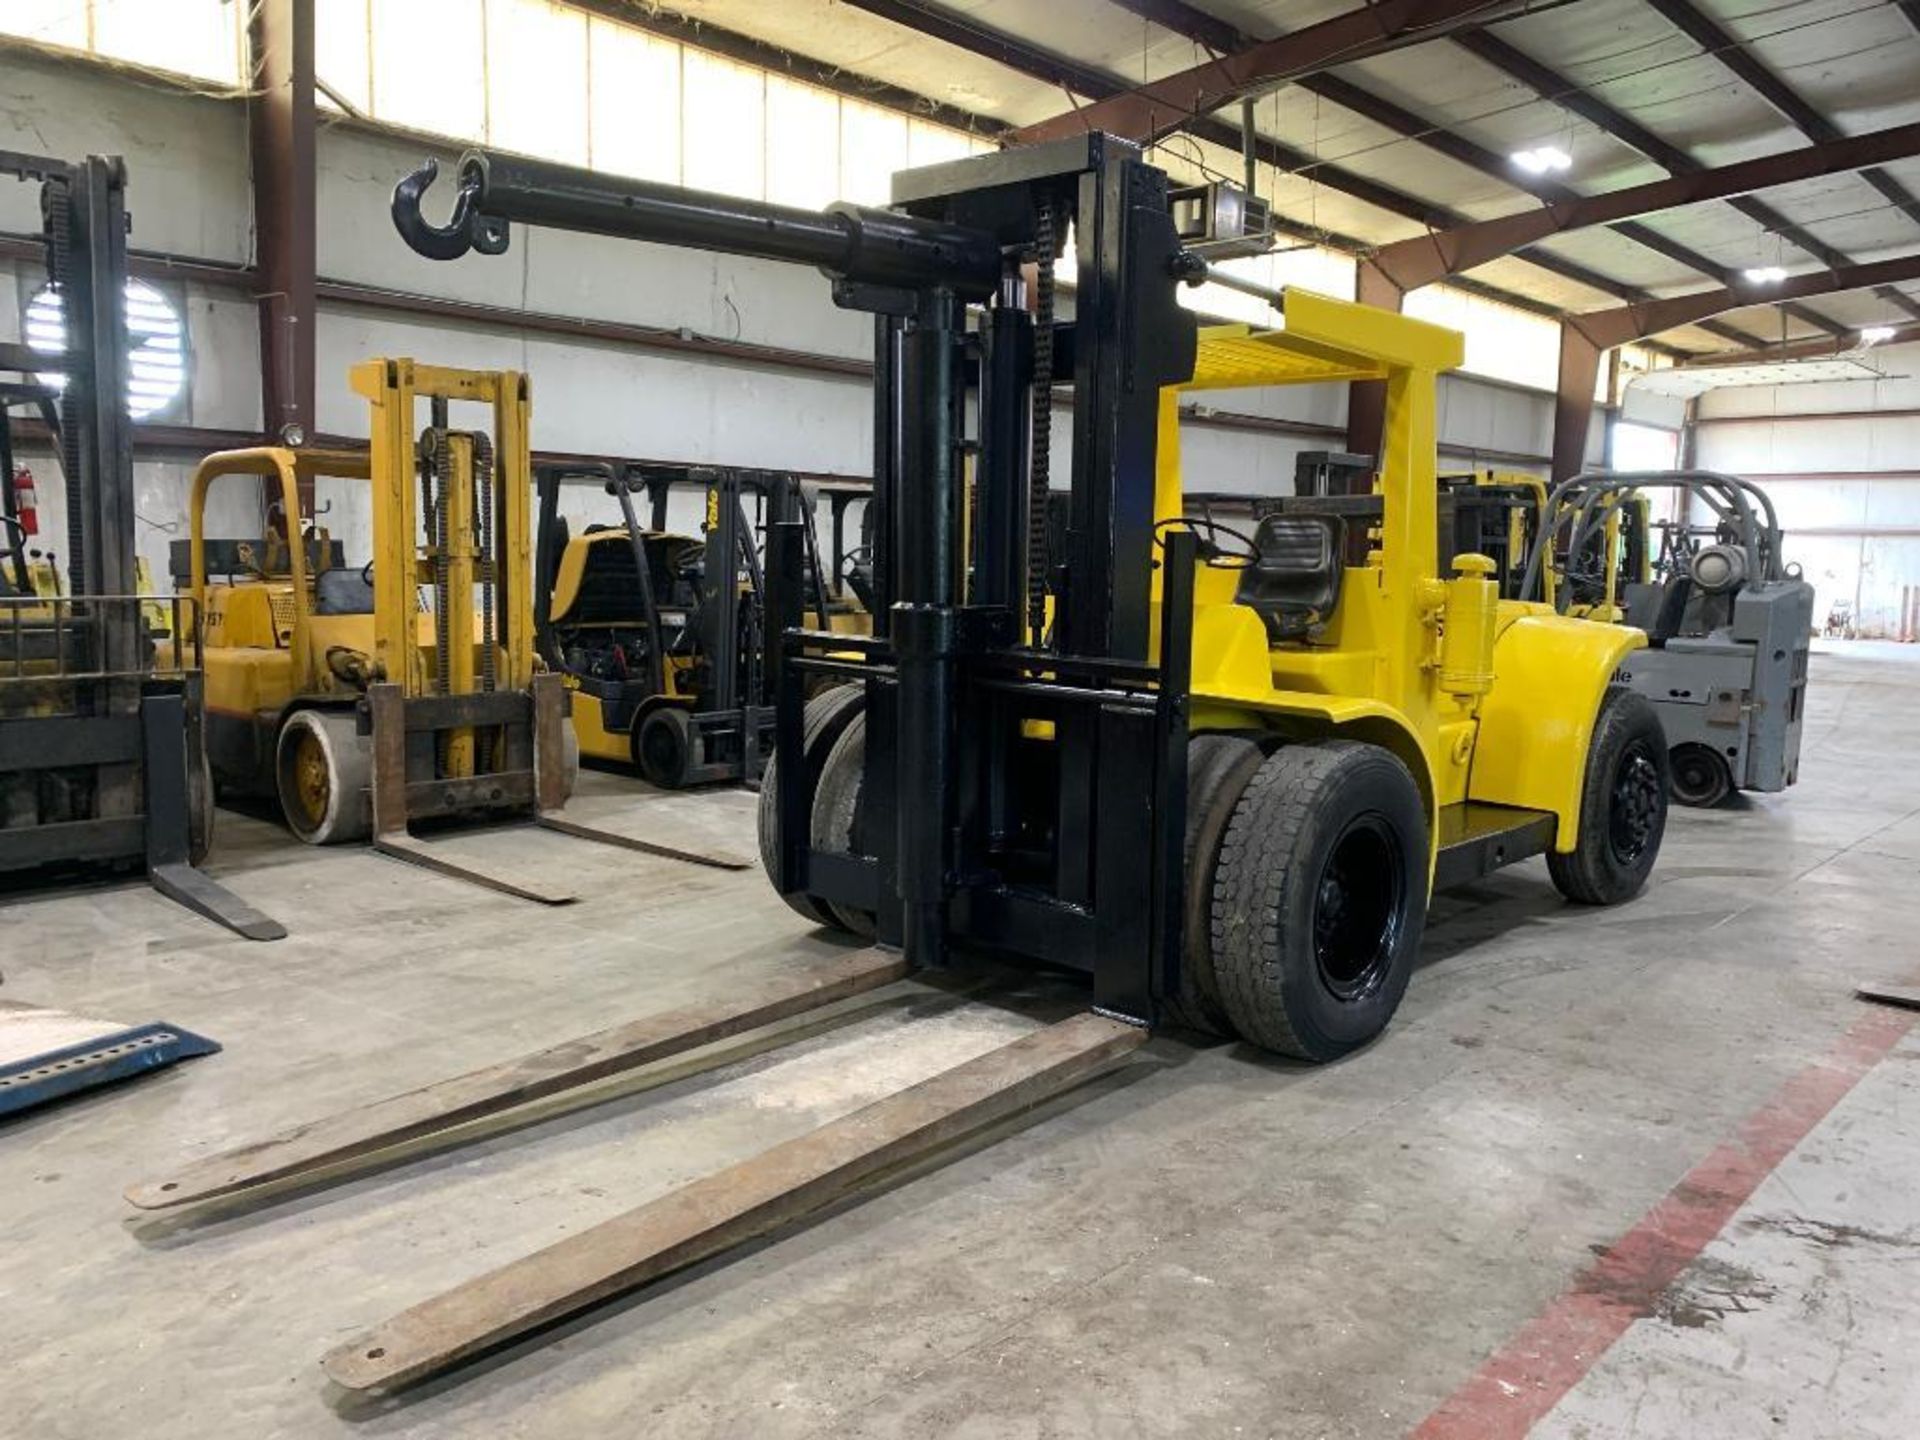 Hyster 22,500 lb. capacity forklift, model h225e, s/n n/a, gasoline, dual drive pneumatic tires, 2-s - Image 2 of 7